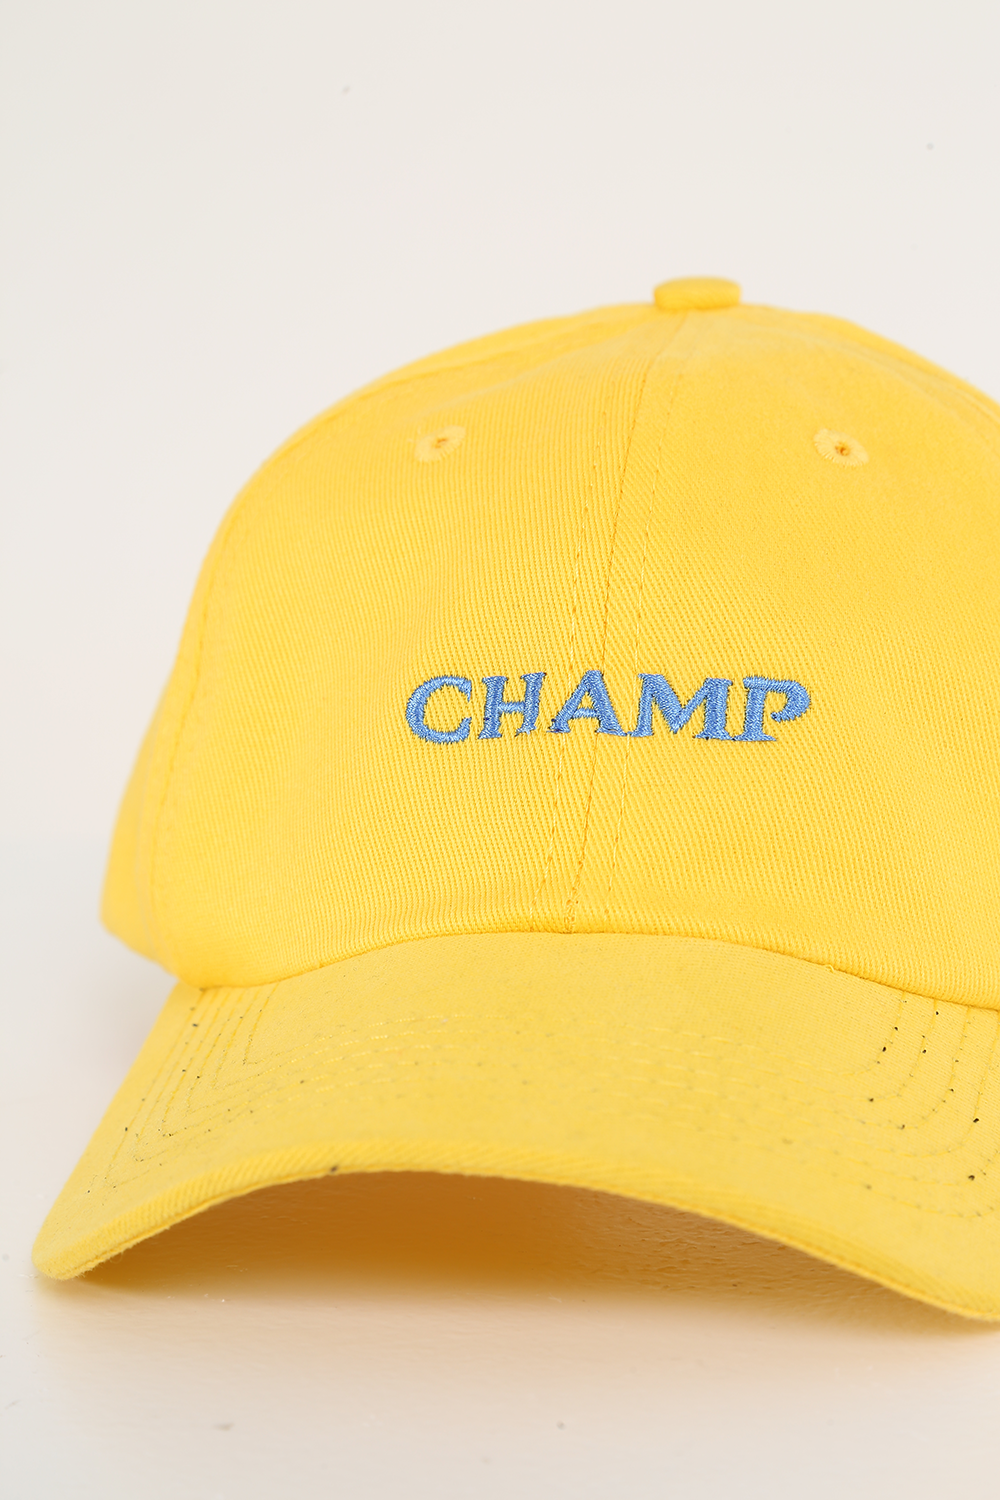 CHAMP ALL MOST VINTAGE CAP